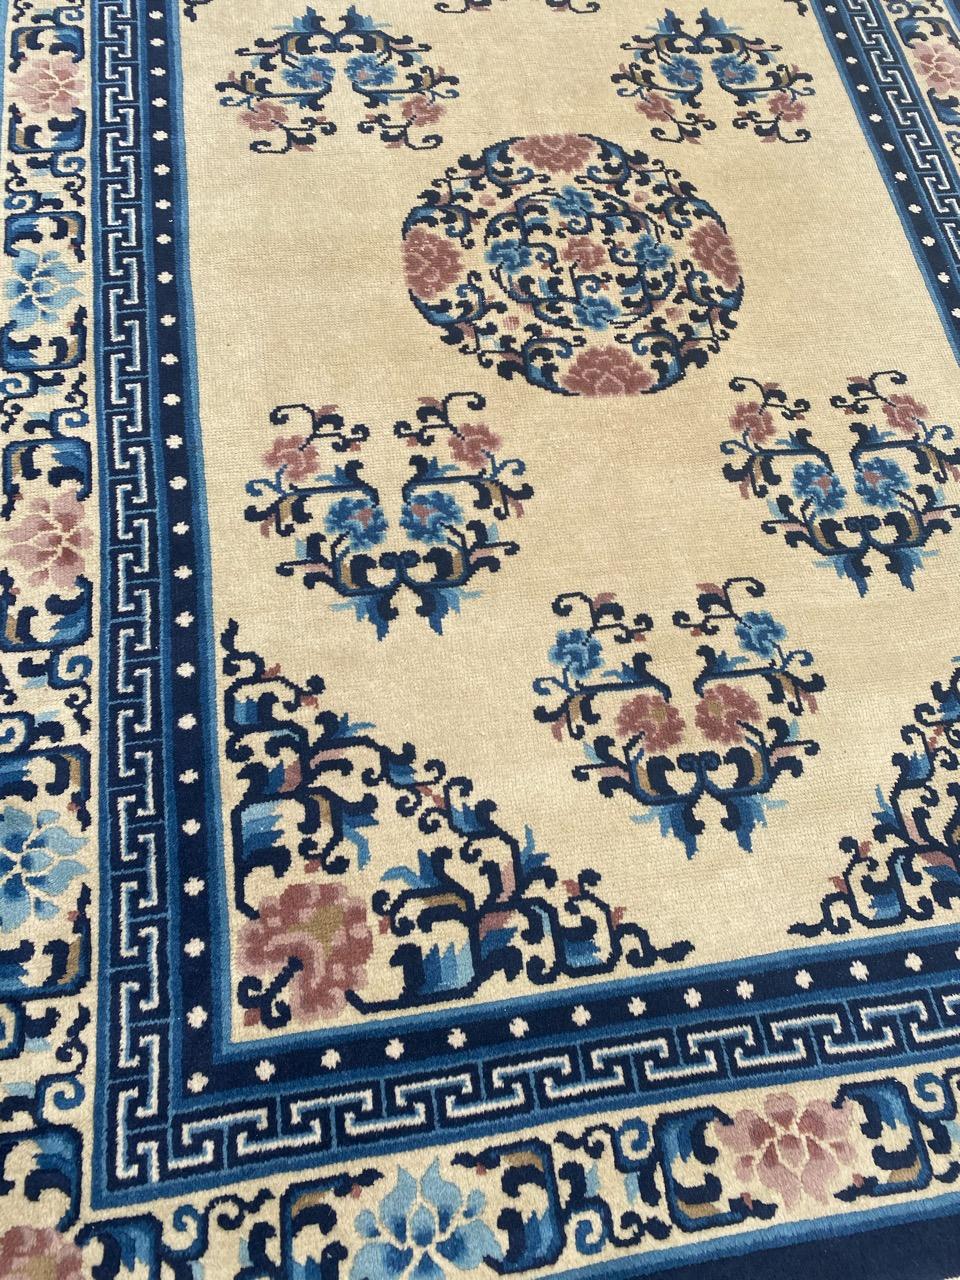 Mid century Chinese beijing rug with beautiful Chinese design and beautiful colors with blue and white, entirely hand knotted with wool velvet on cotton foundation.

✨✨✨
